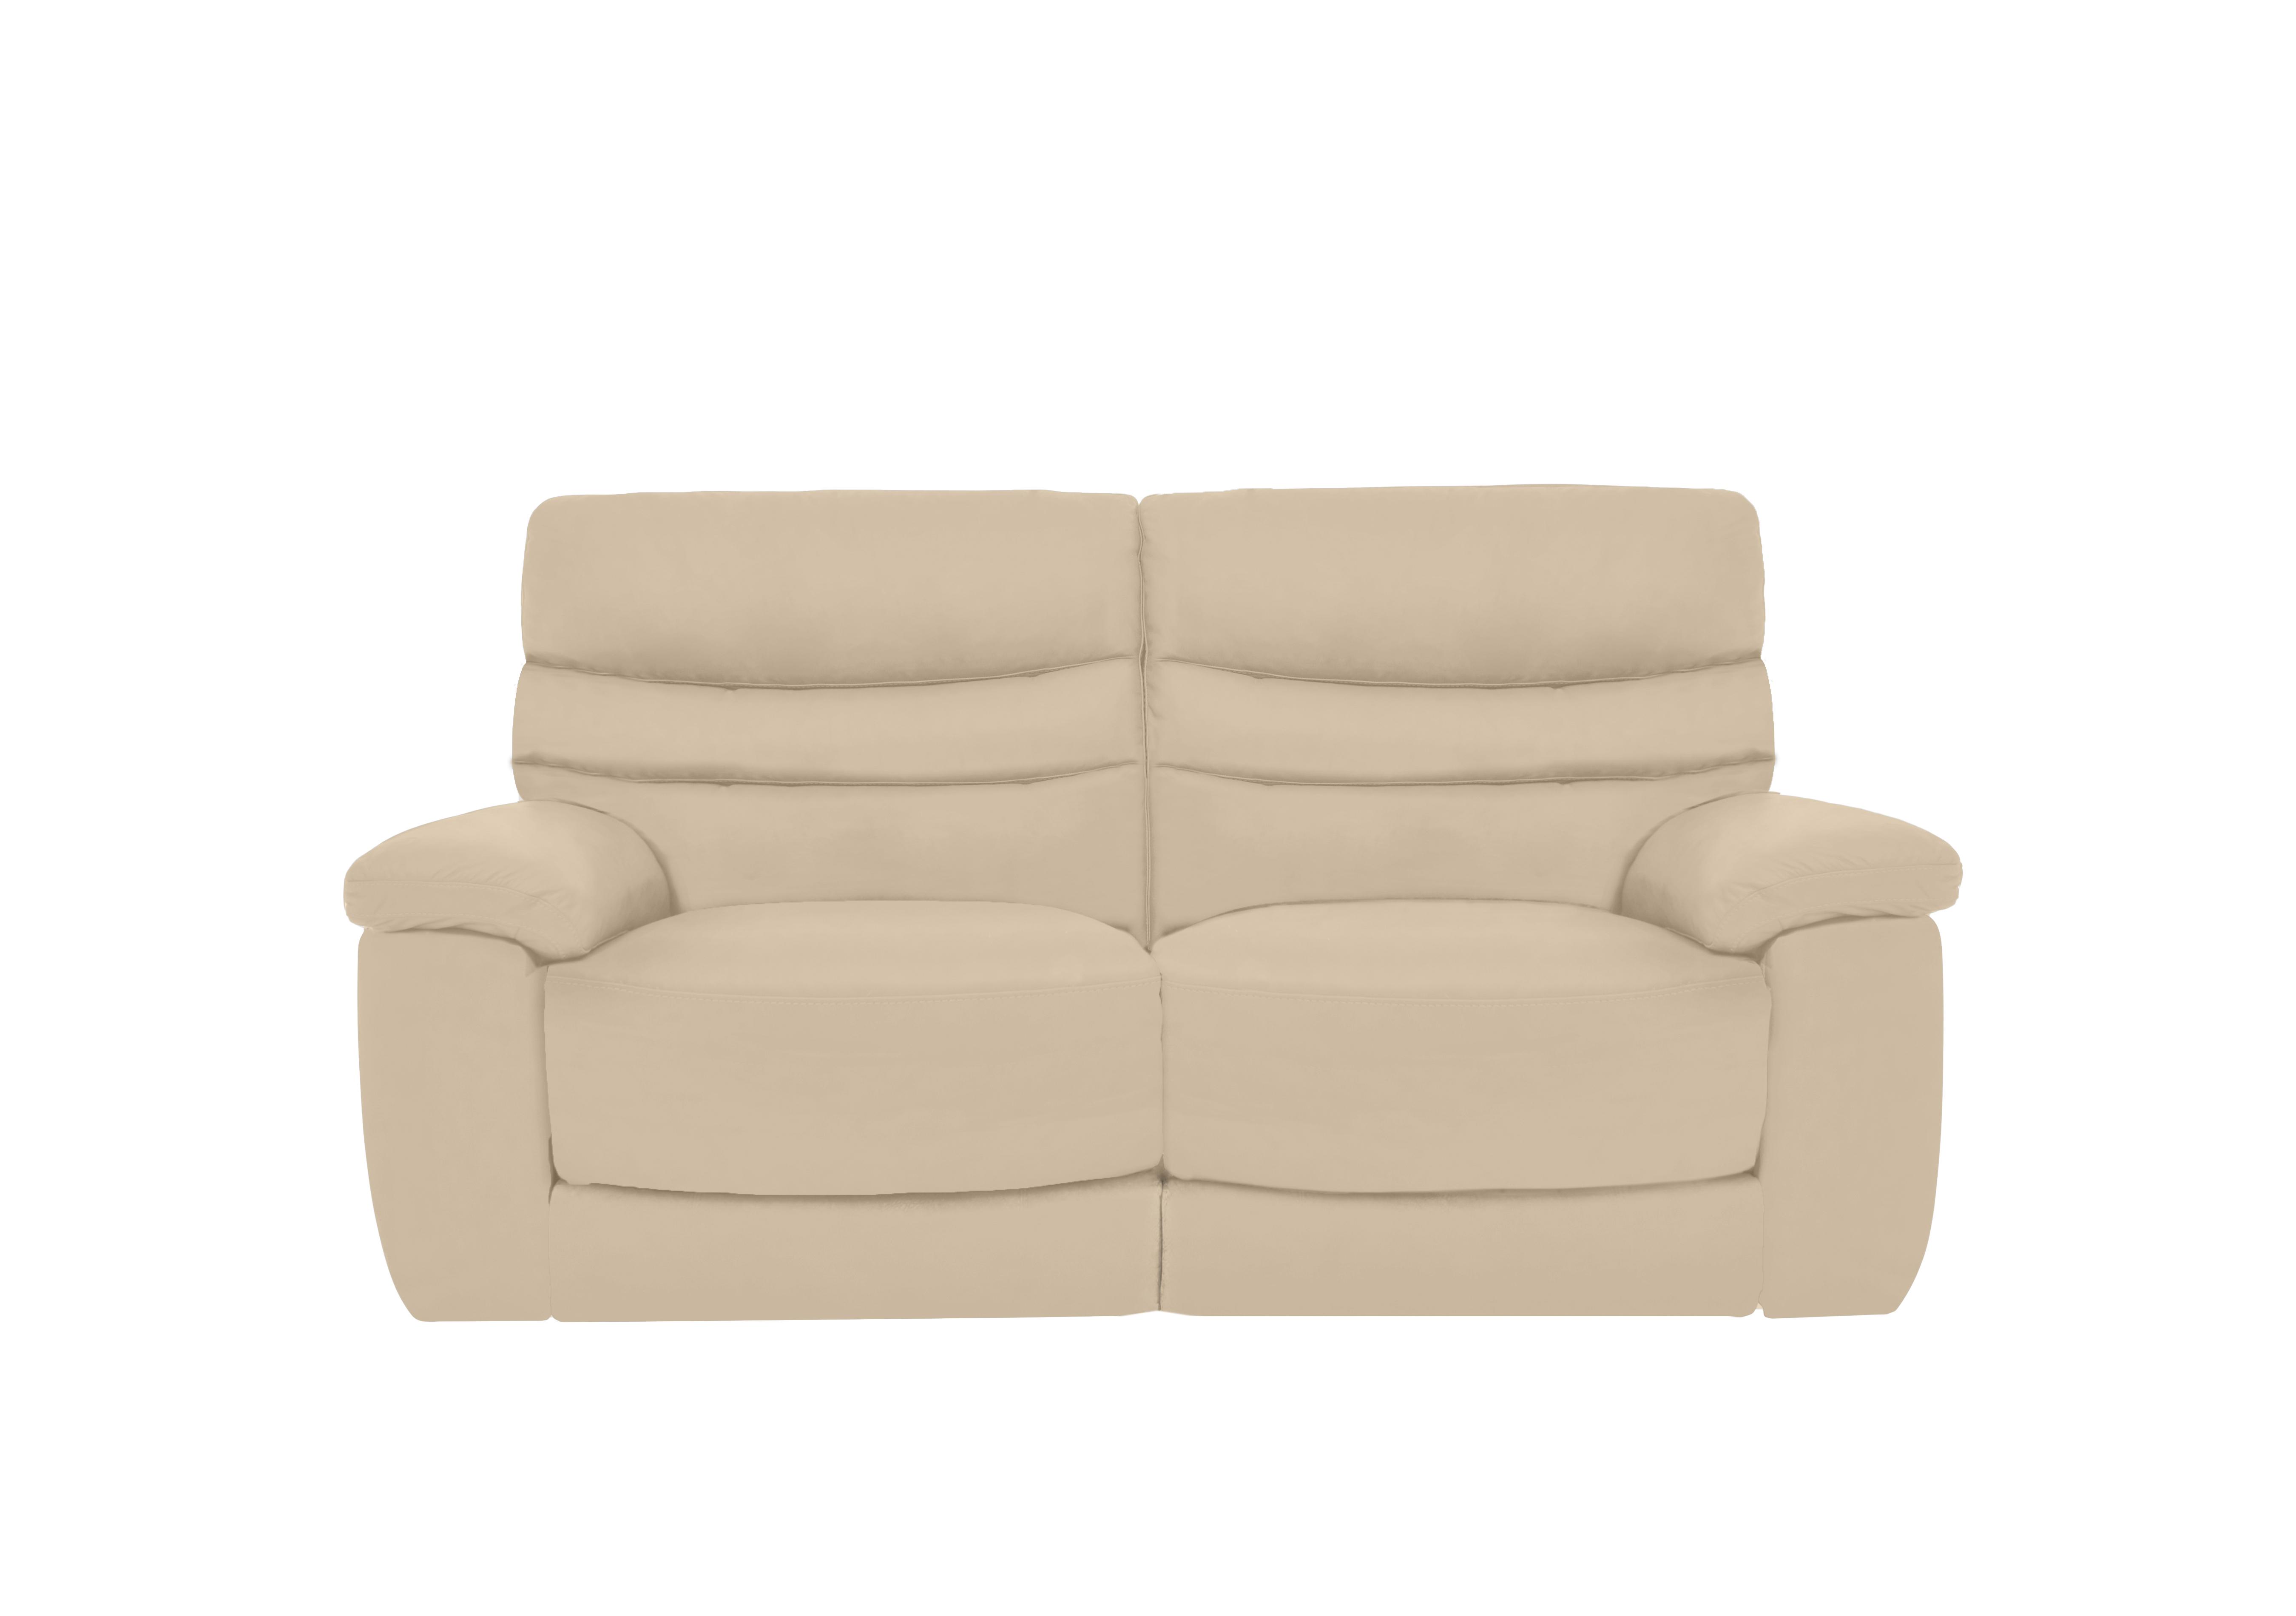 Nimbus 2 Seater Leather Power Recliner Sofa with Power Headrests and Power Lumbar in Bx-862c Bisque on Furniture Village